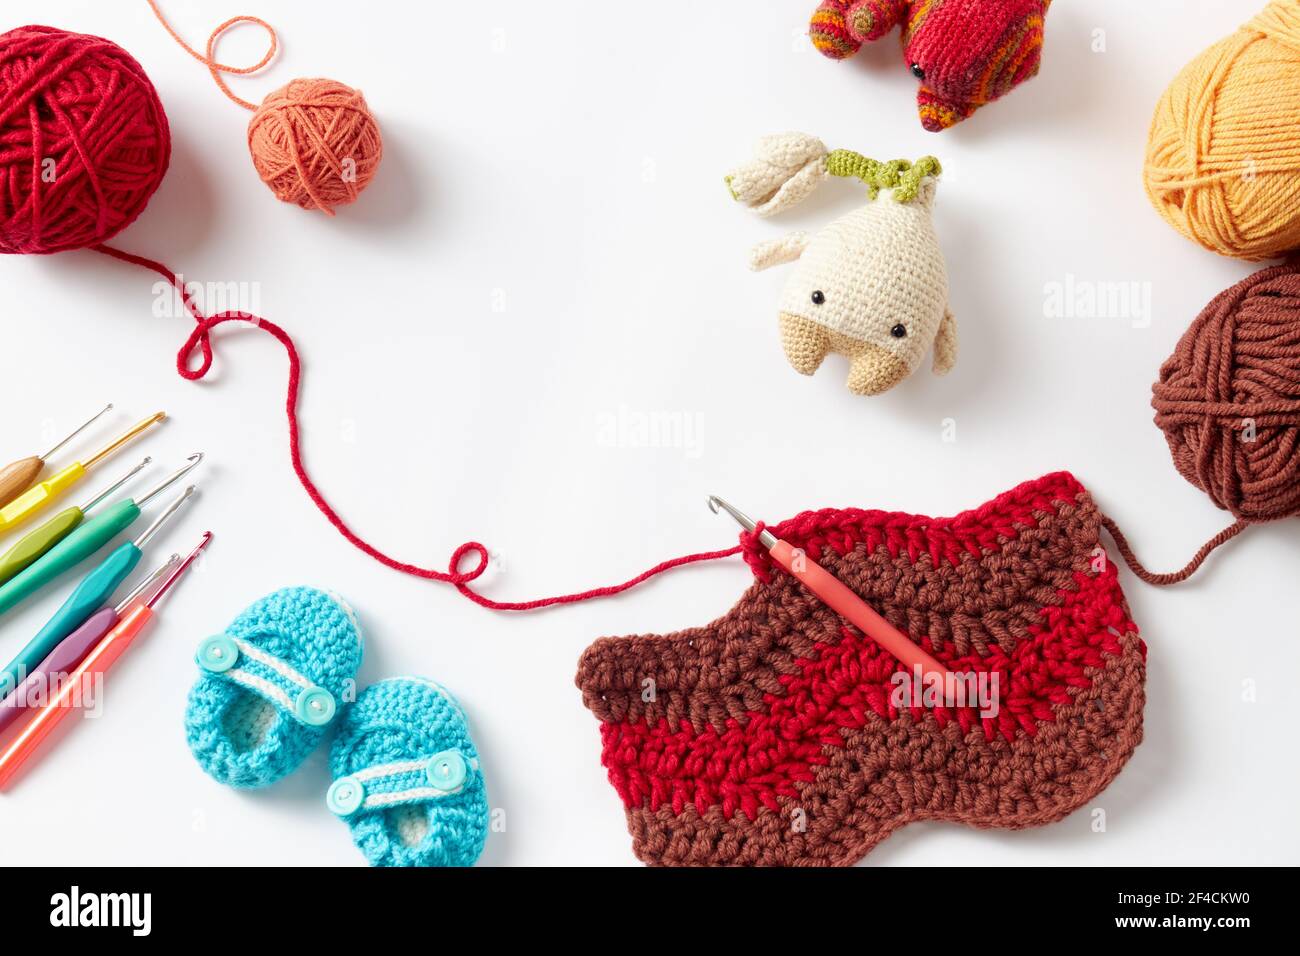 Colorful crochet project with hook and yarn, on white background. Stock Photo